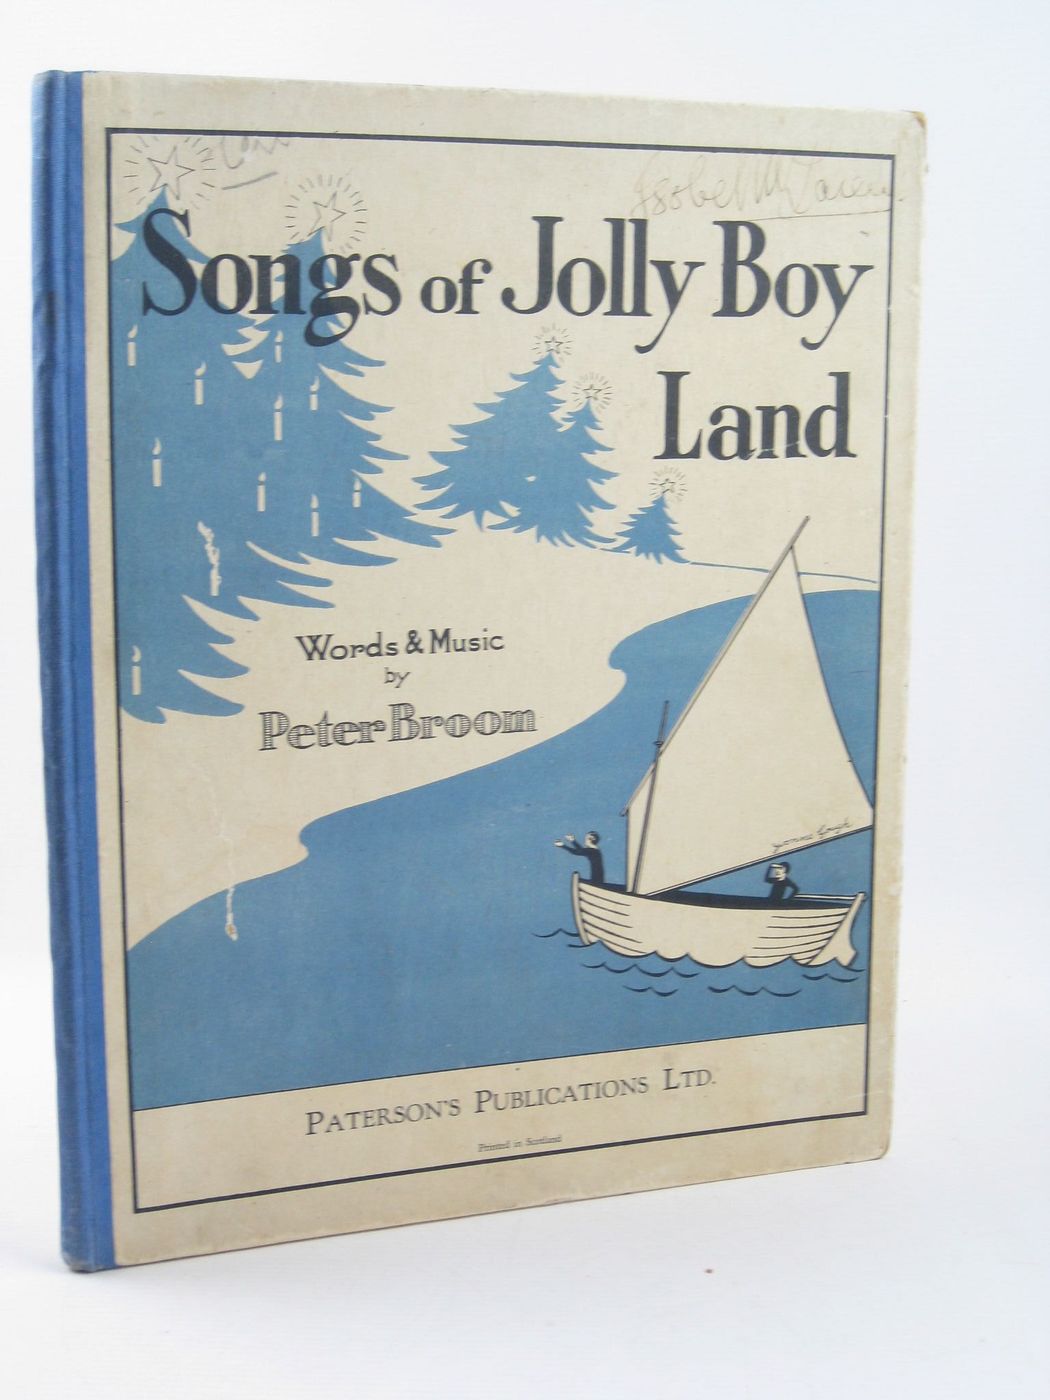 Cover of SONGS OF JOLLY BOY LAND by Peter Broom